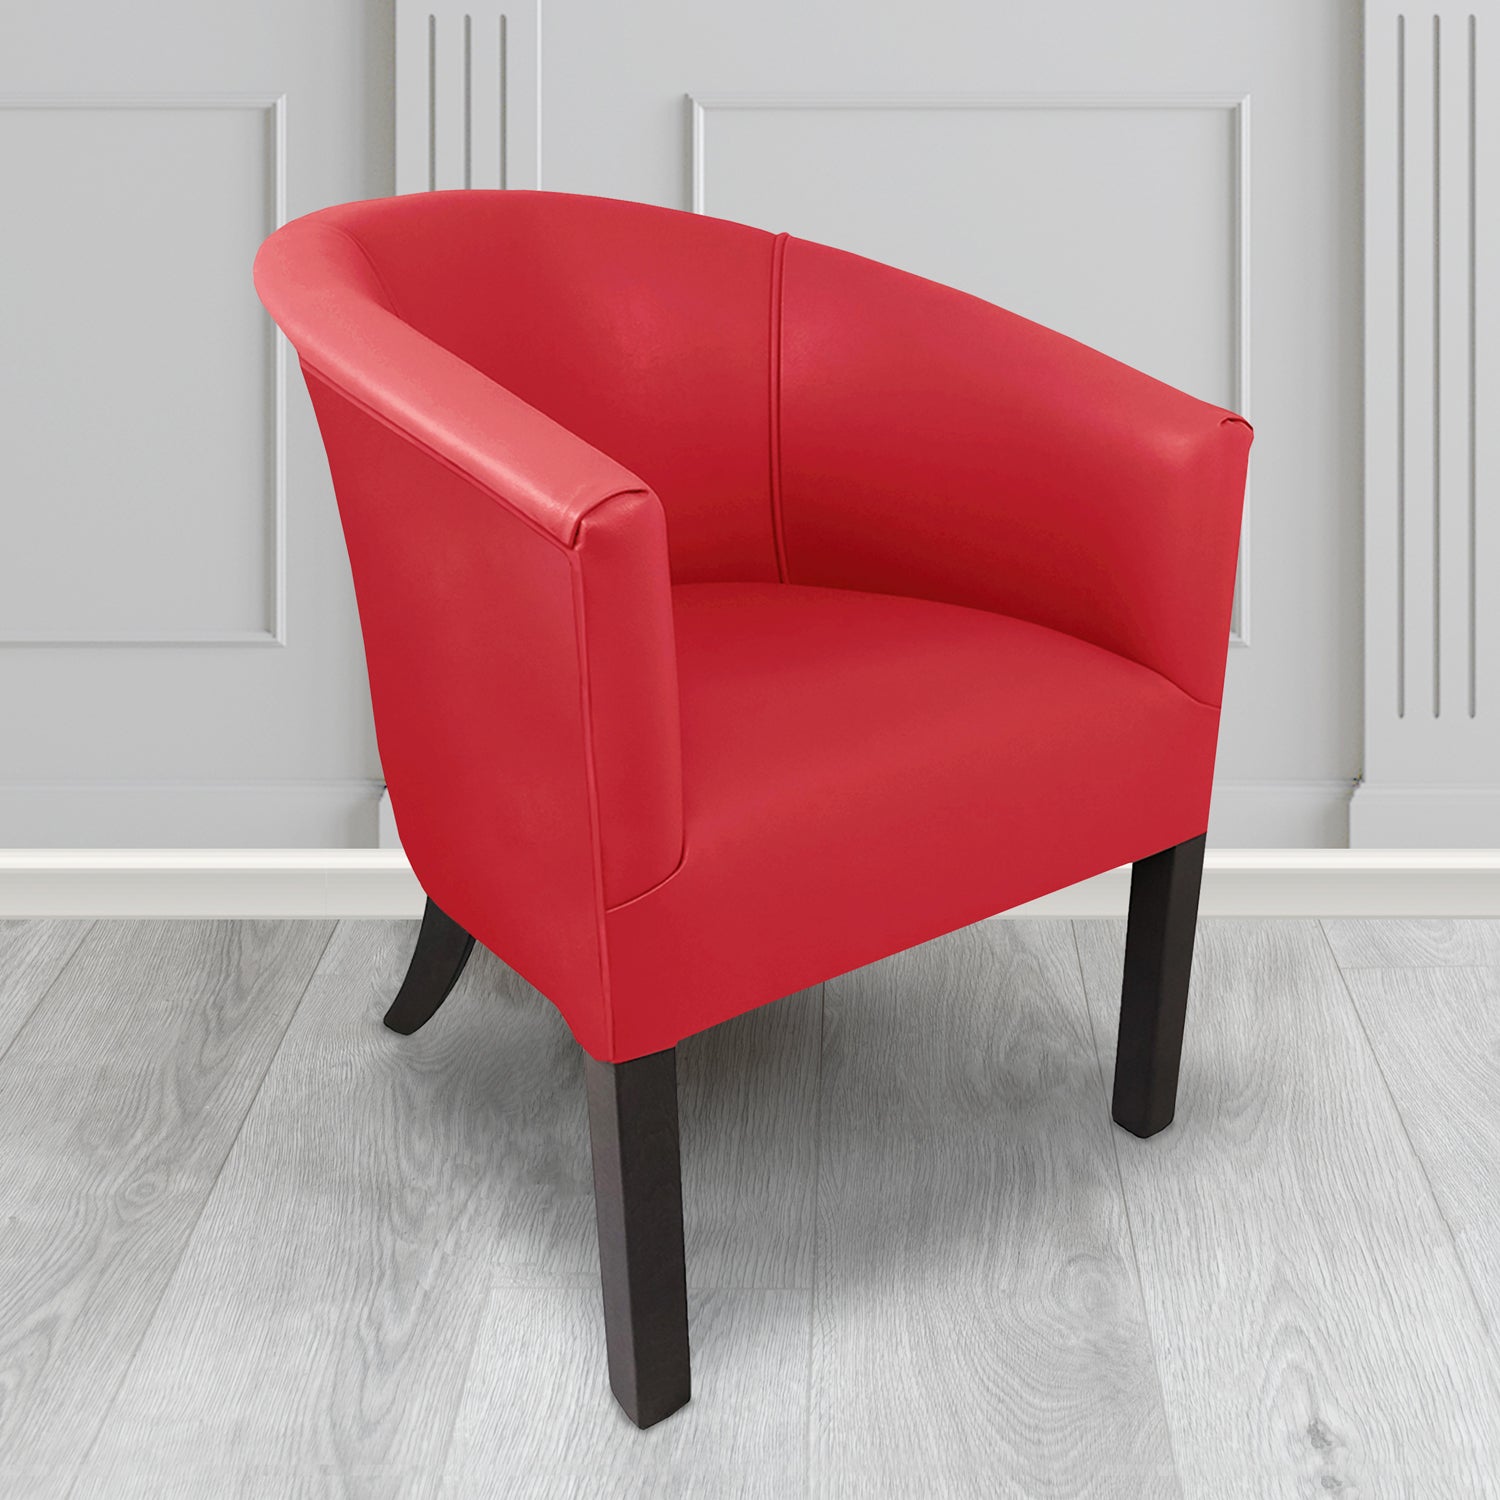 Lewisham Tub Chair in Agua Paint Pot Scarlet Crib 5 Faux Leather - Antimicrobial, Stain Resistant & Waterproof - The Tub Chair Shop